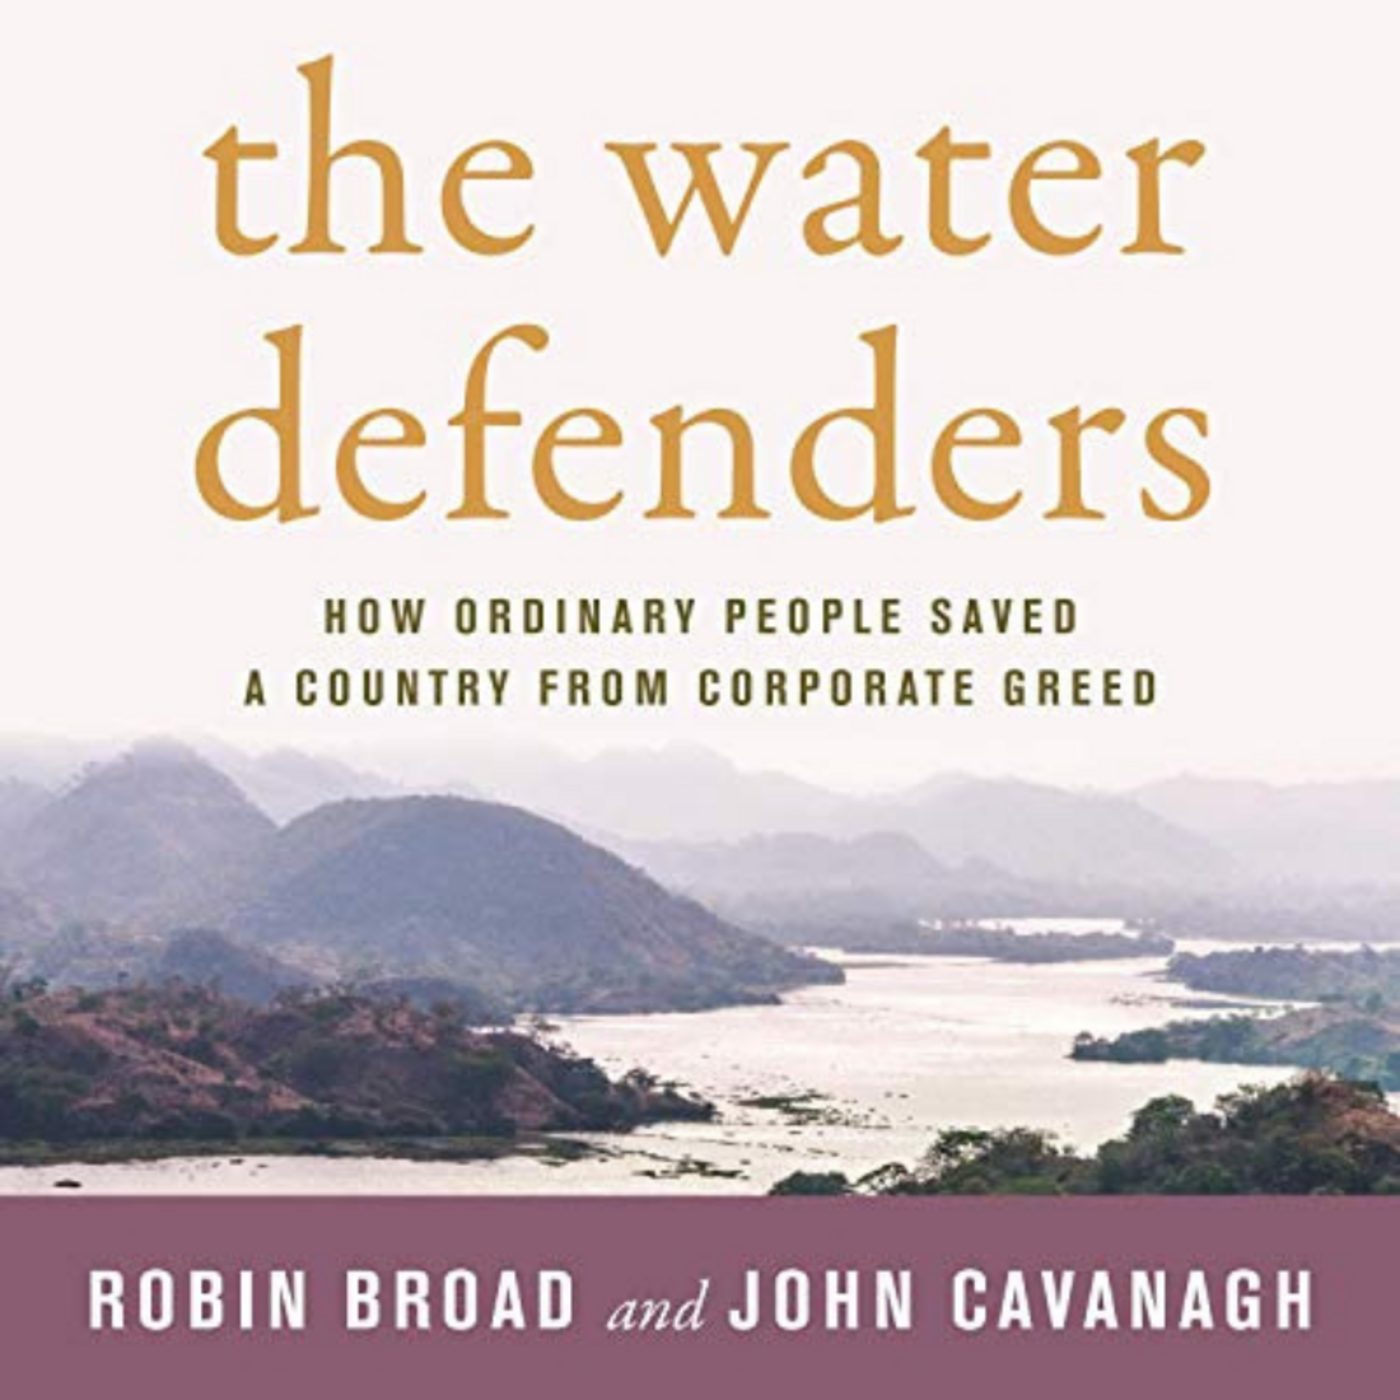 Episode 248: The Water Defenders: How Ordinary People Saved a Country from Corporate Greed: A Conversation with Co-authors Robin Broad and John Cavanagh